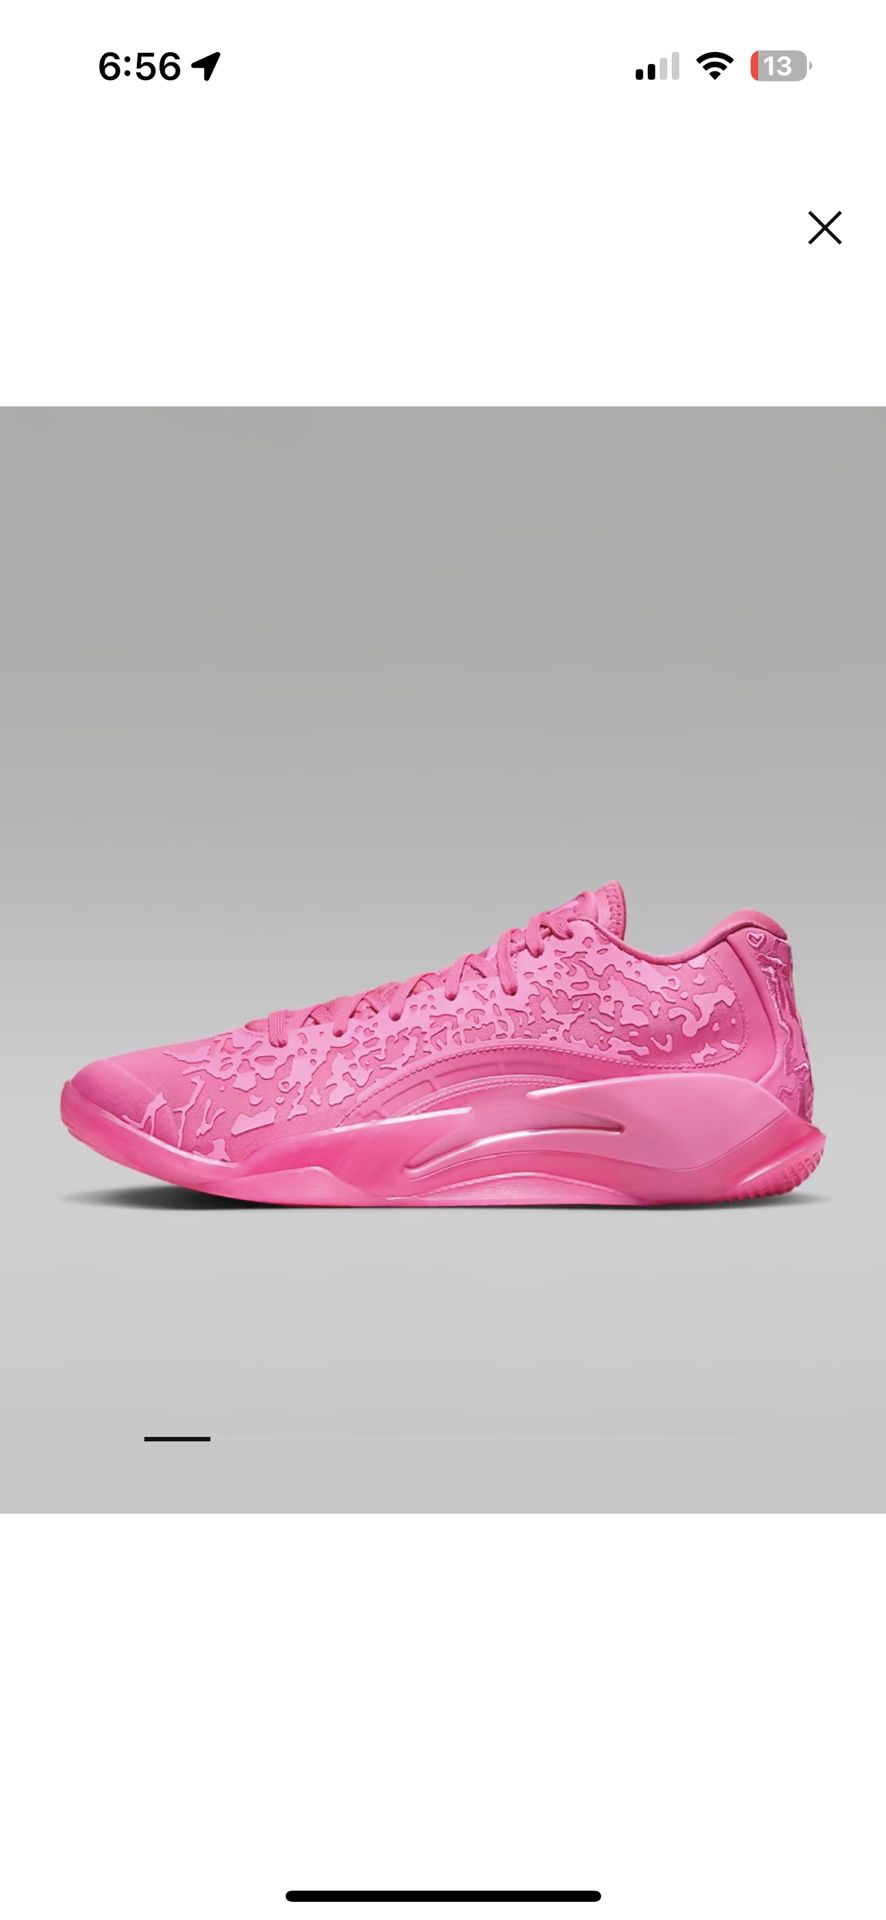 Zion 3s all pink 